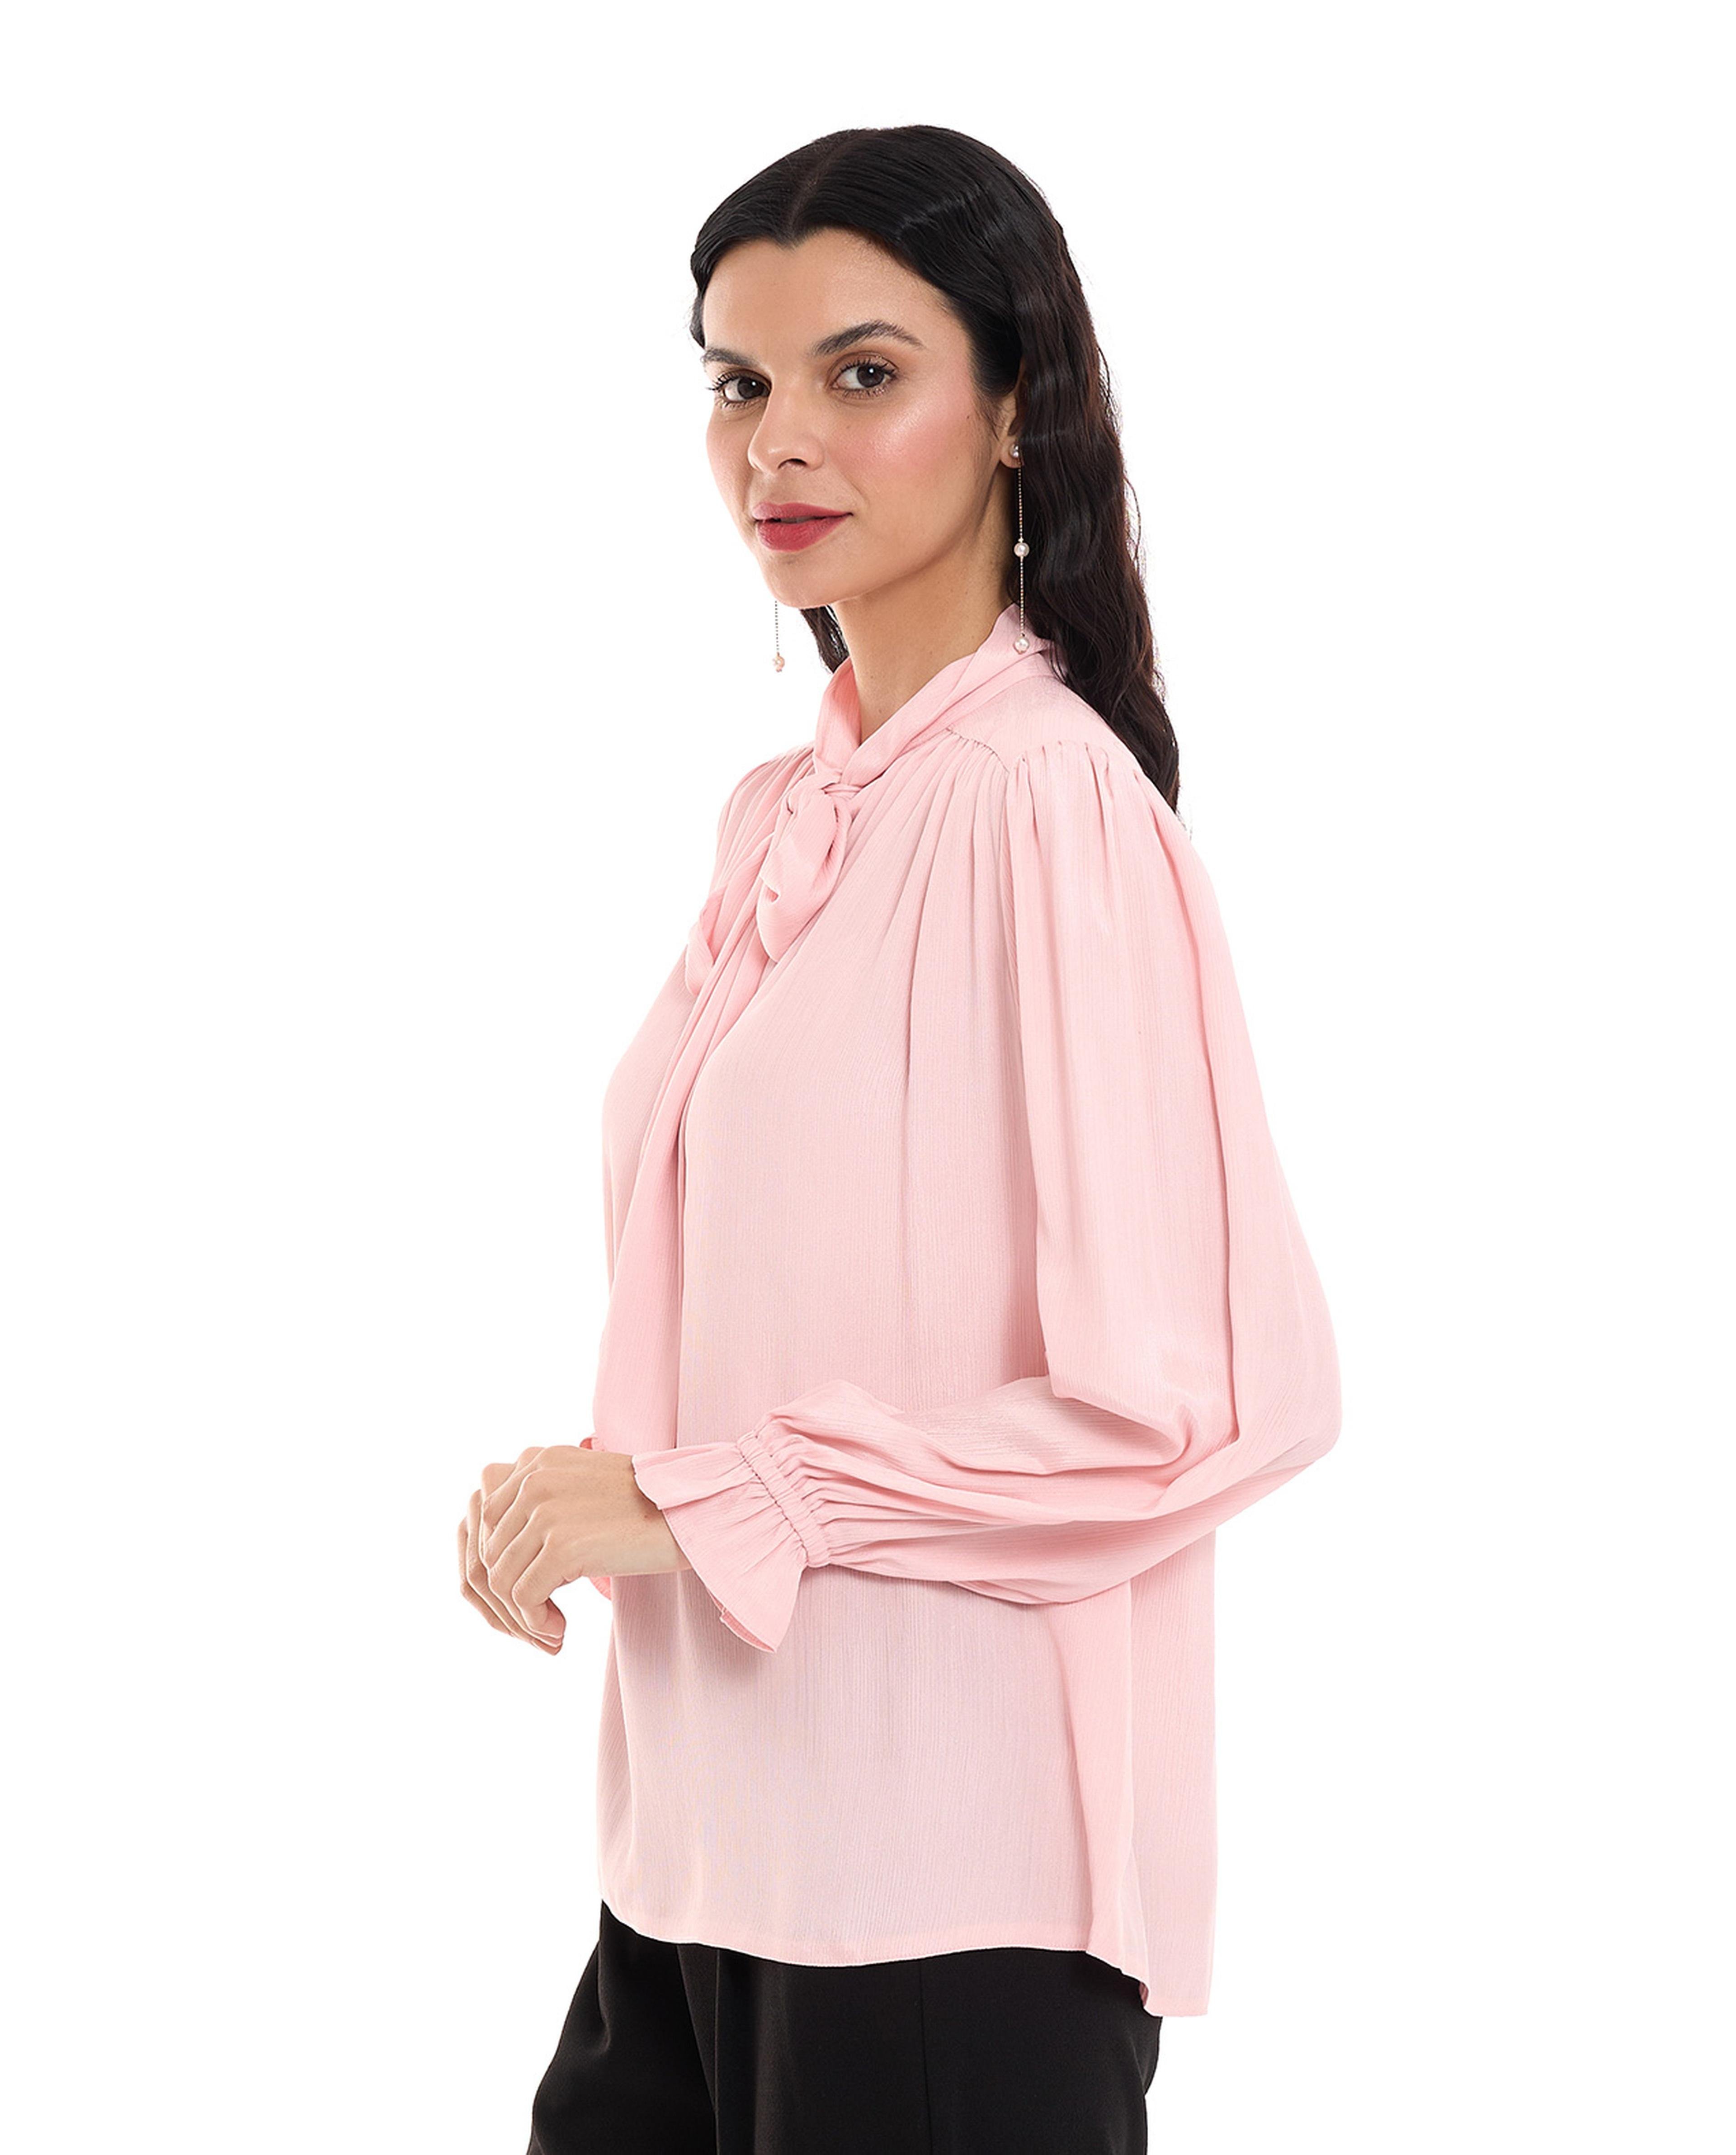 Textured Top with Tie-Up Neck and Long Sleeves